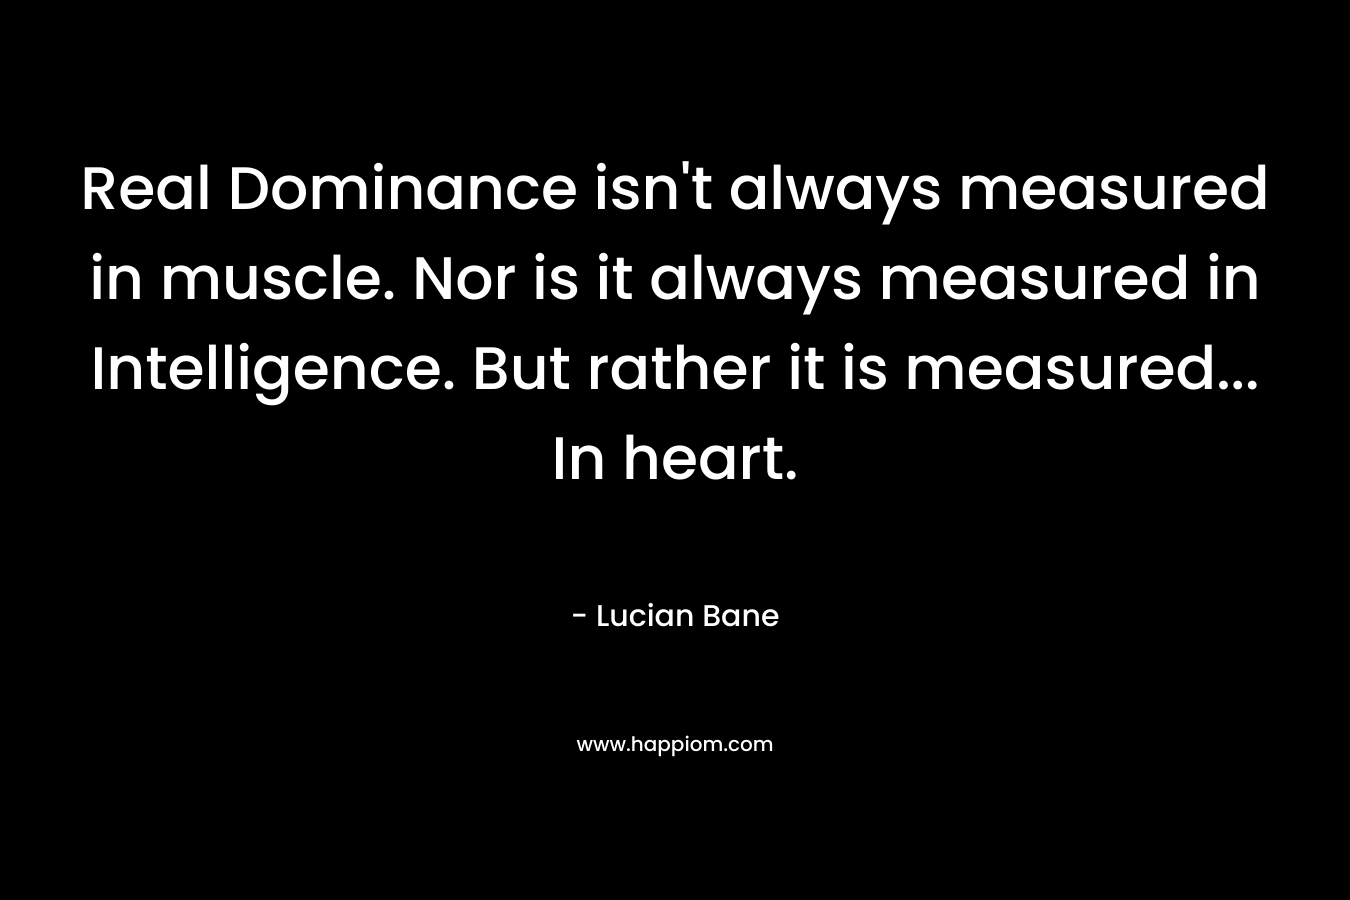 Real Dominance isn't always measured in muscle. Nor is it always measured in Intelligence. But rather it is measured... In heart.